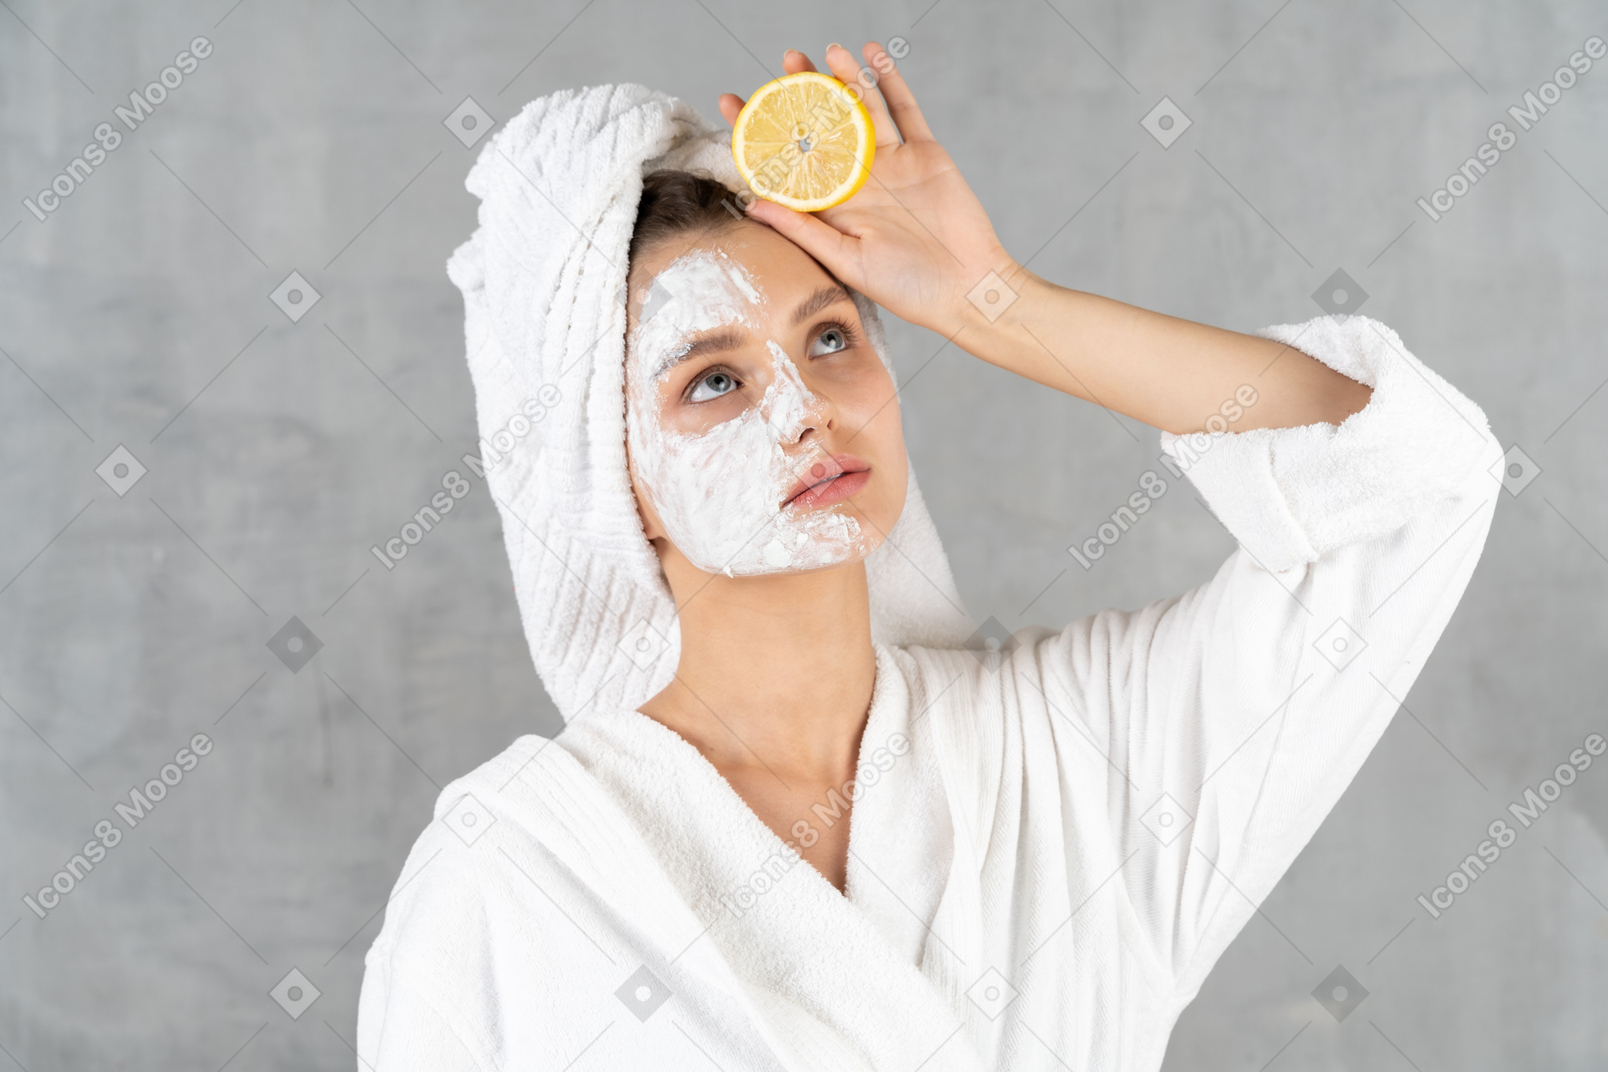 Close-up of a woman in bathrobe with a lemon in hand